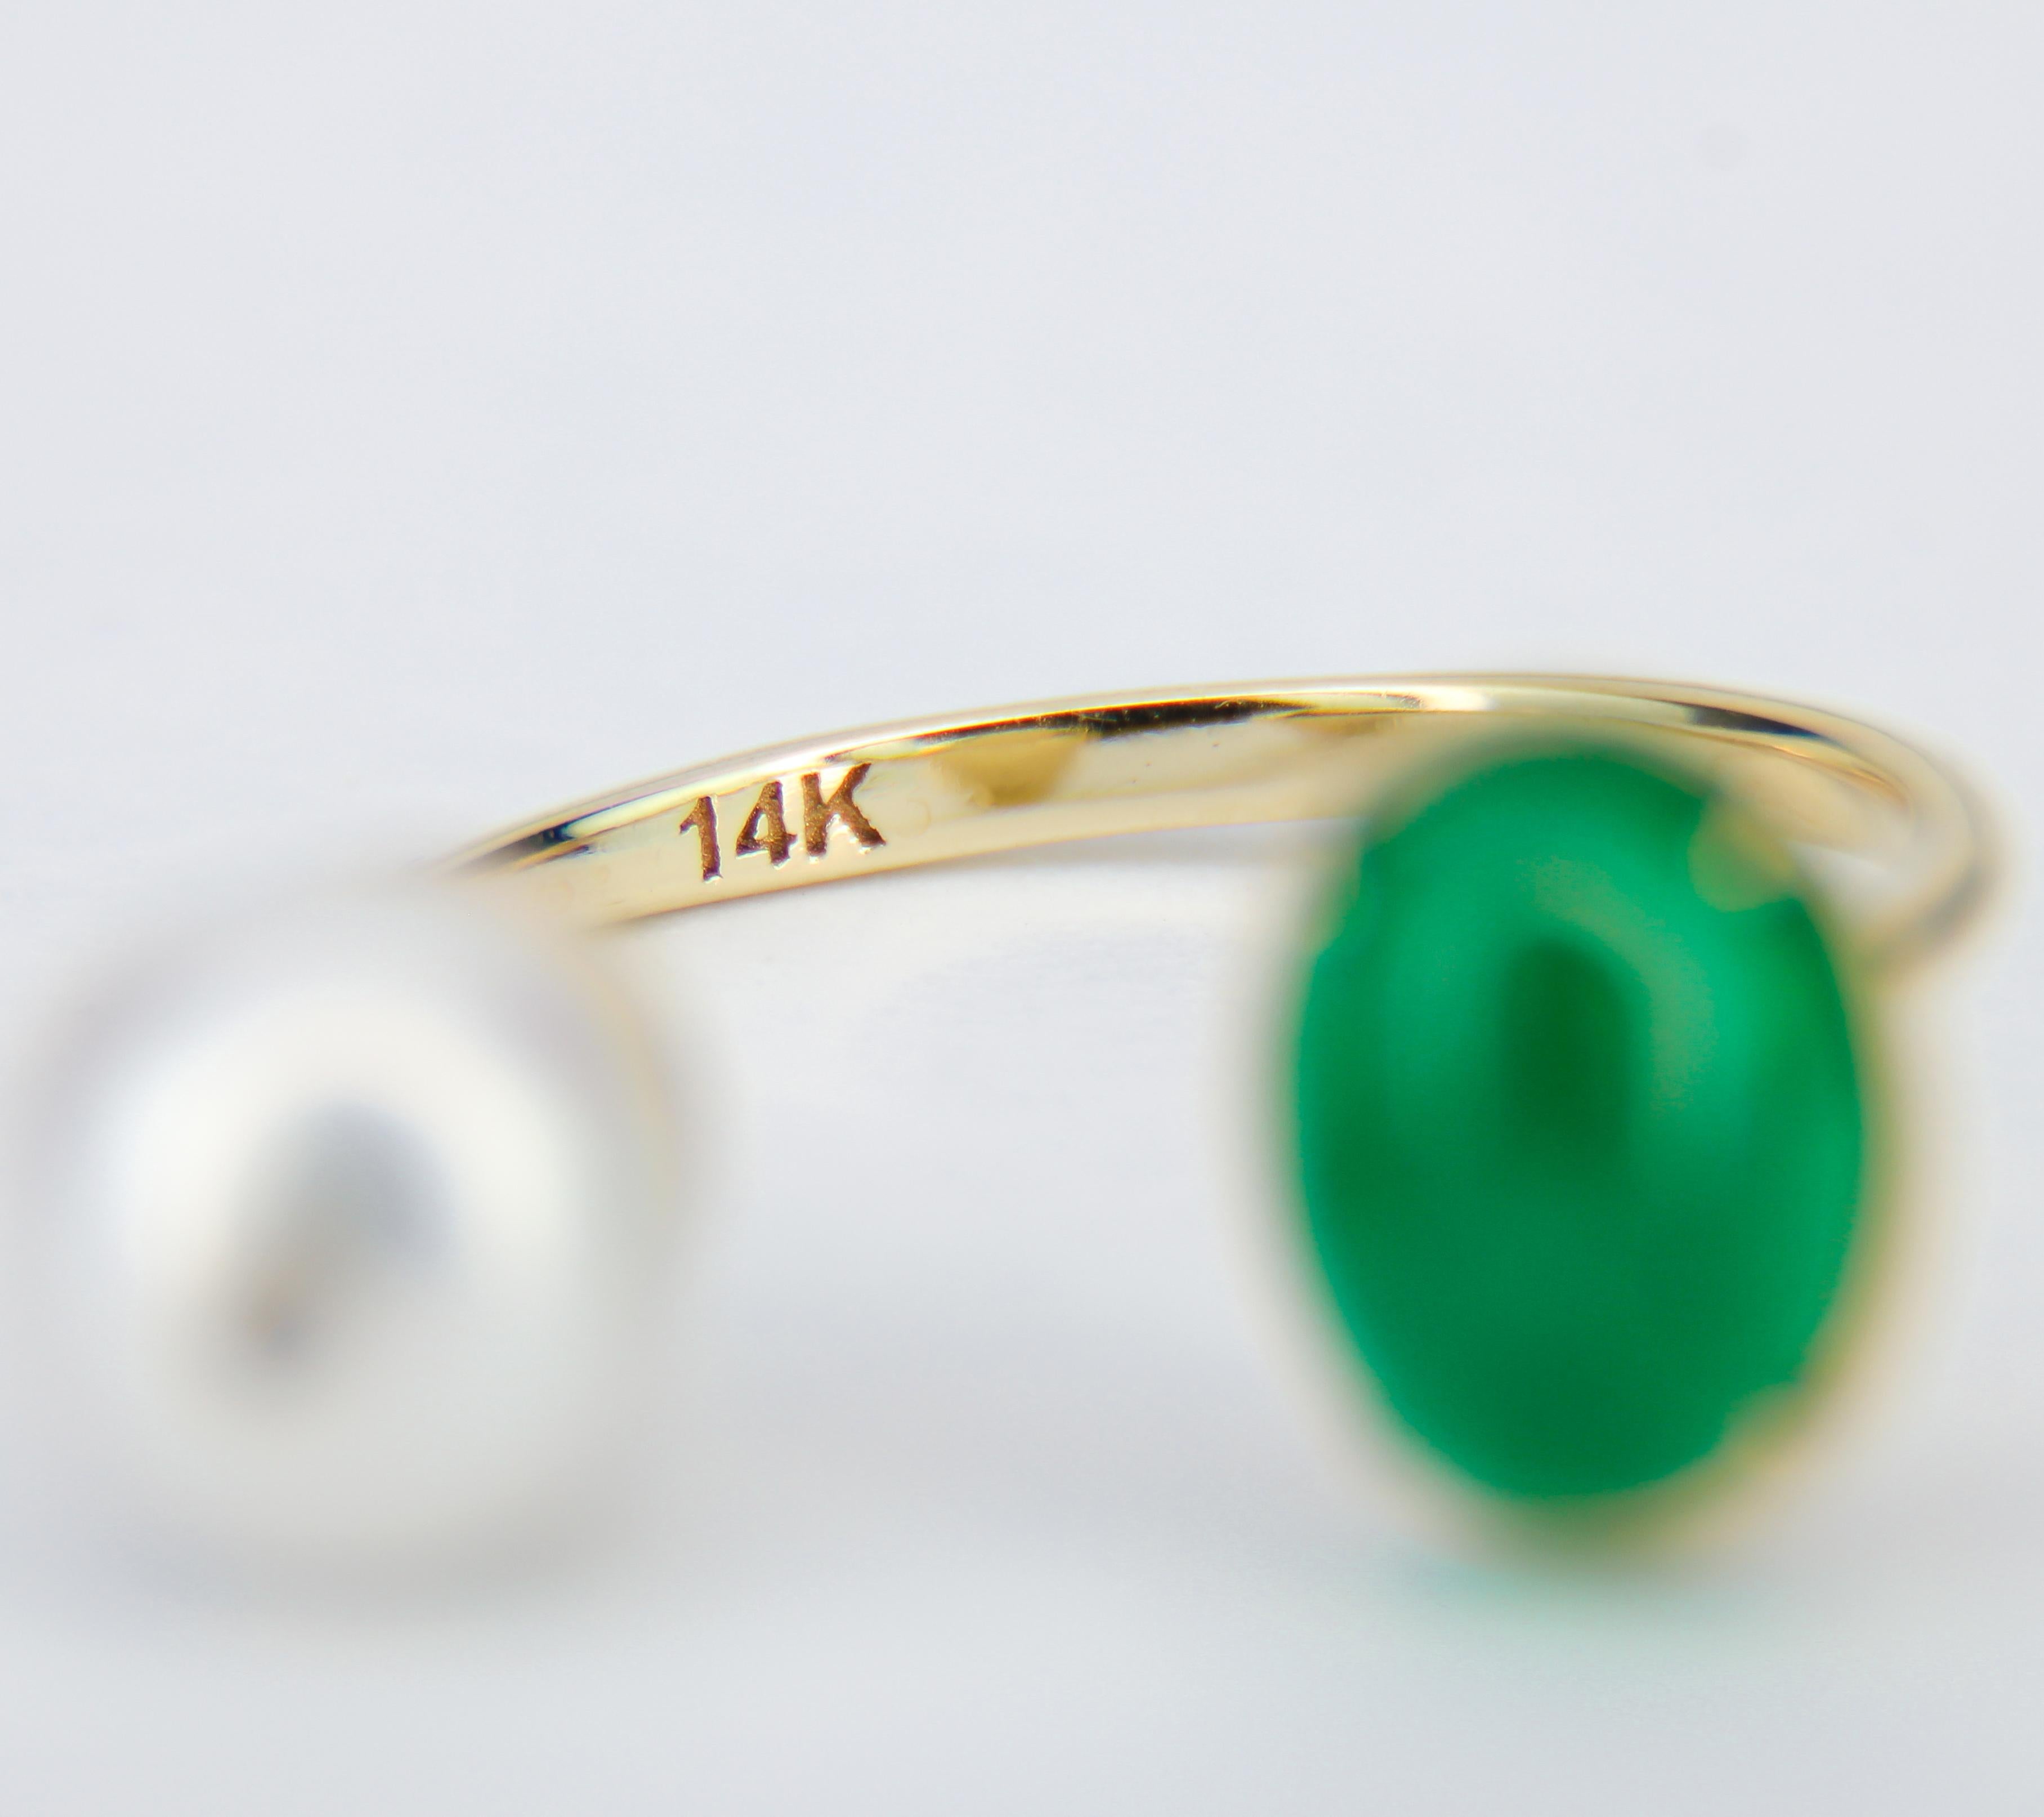 For Sale:  Emerald and Pearl 14k gold ring. Adjustable emerald ring 17